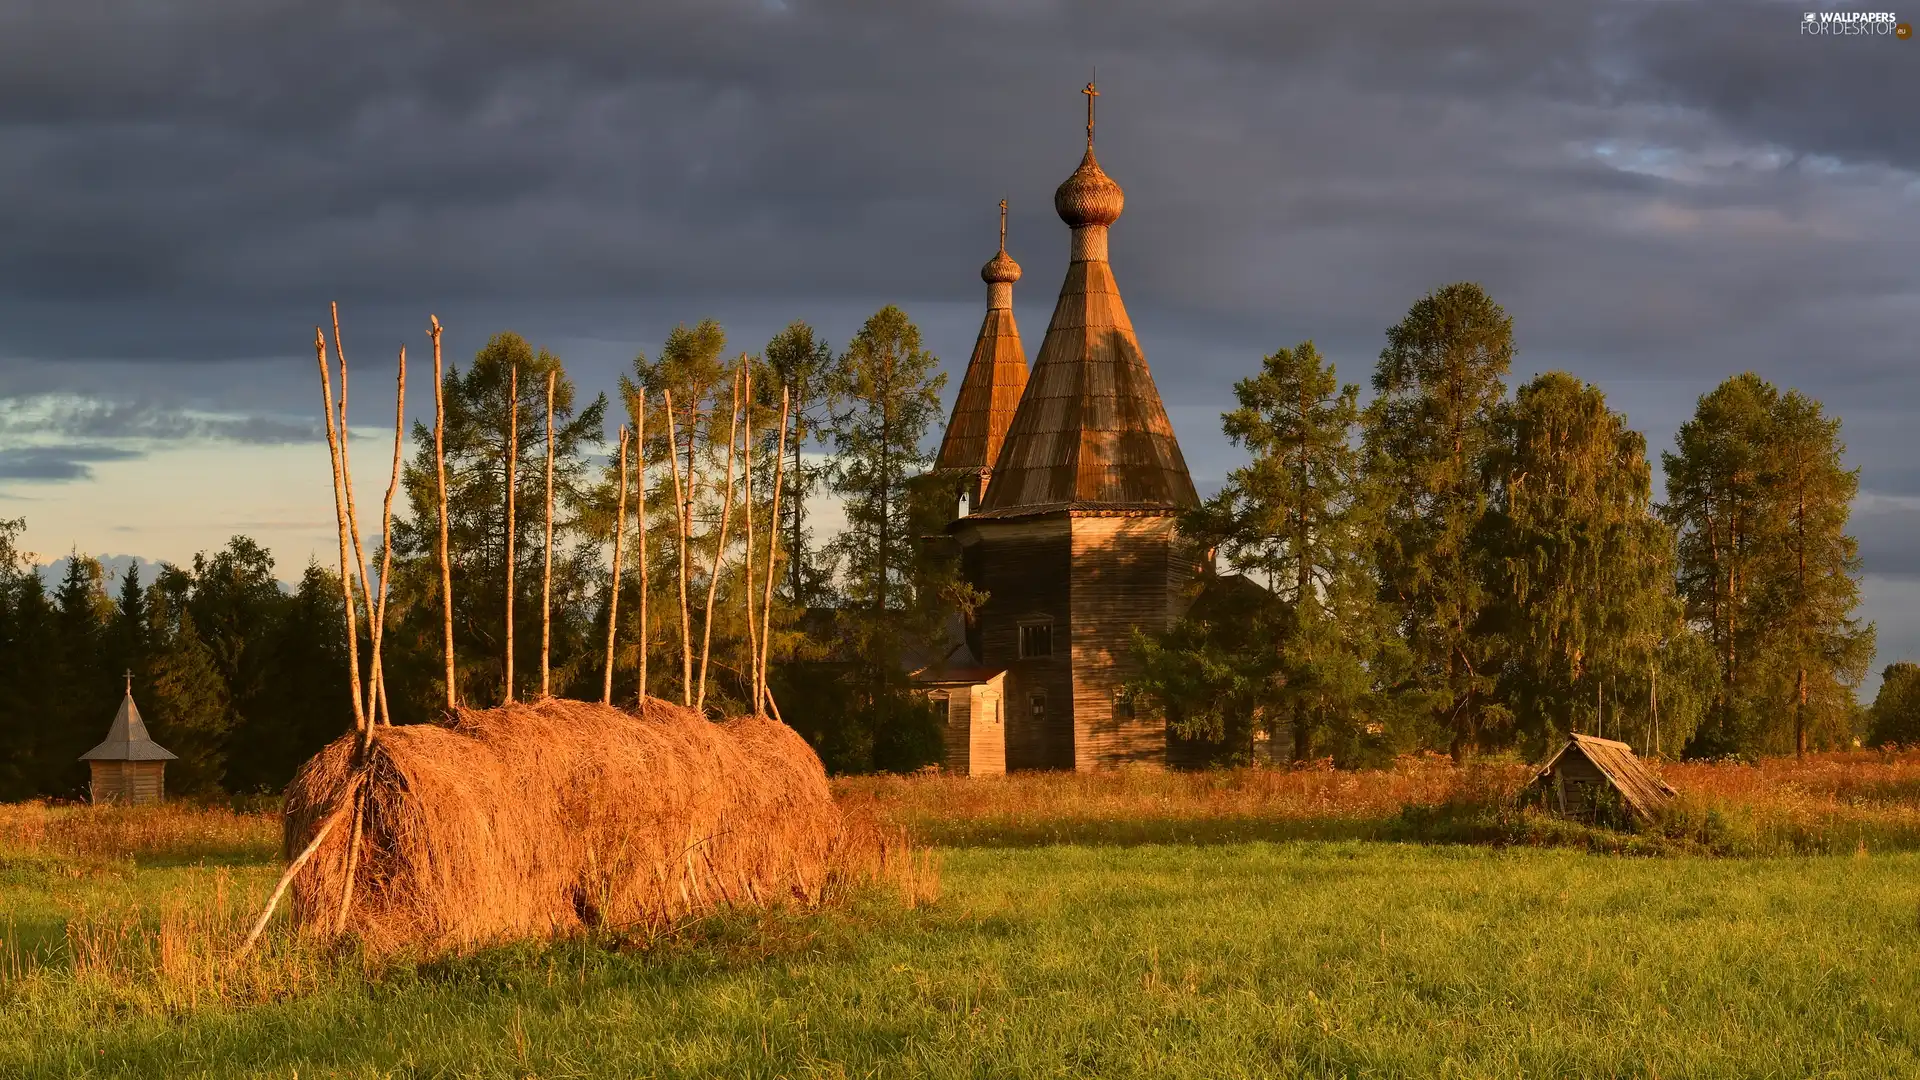 viewes, Church, Hay, Field, Stack, trees